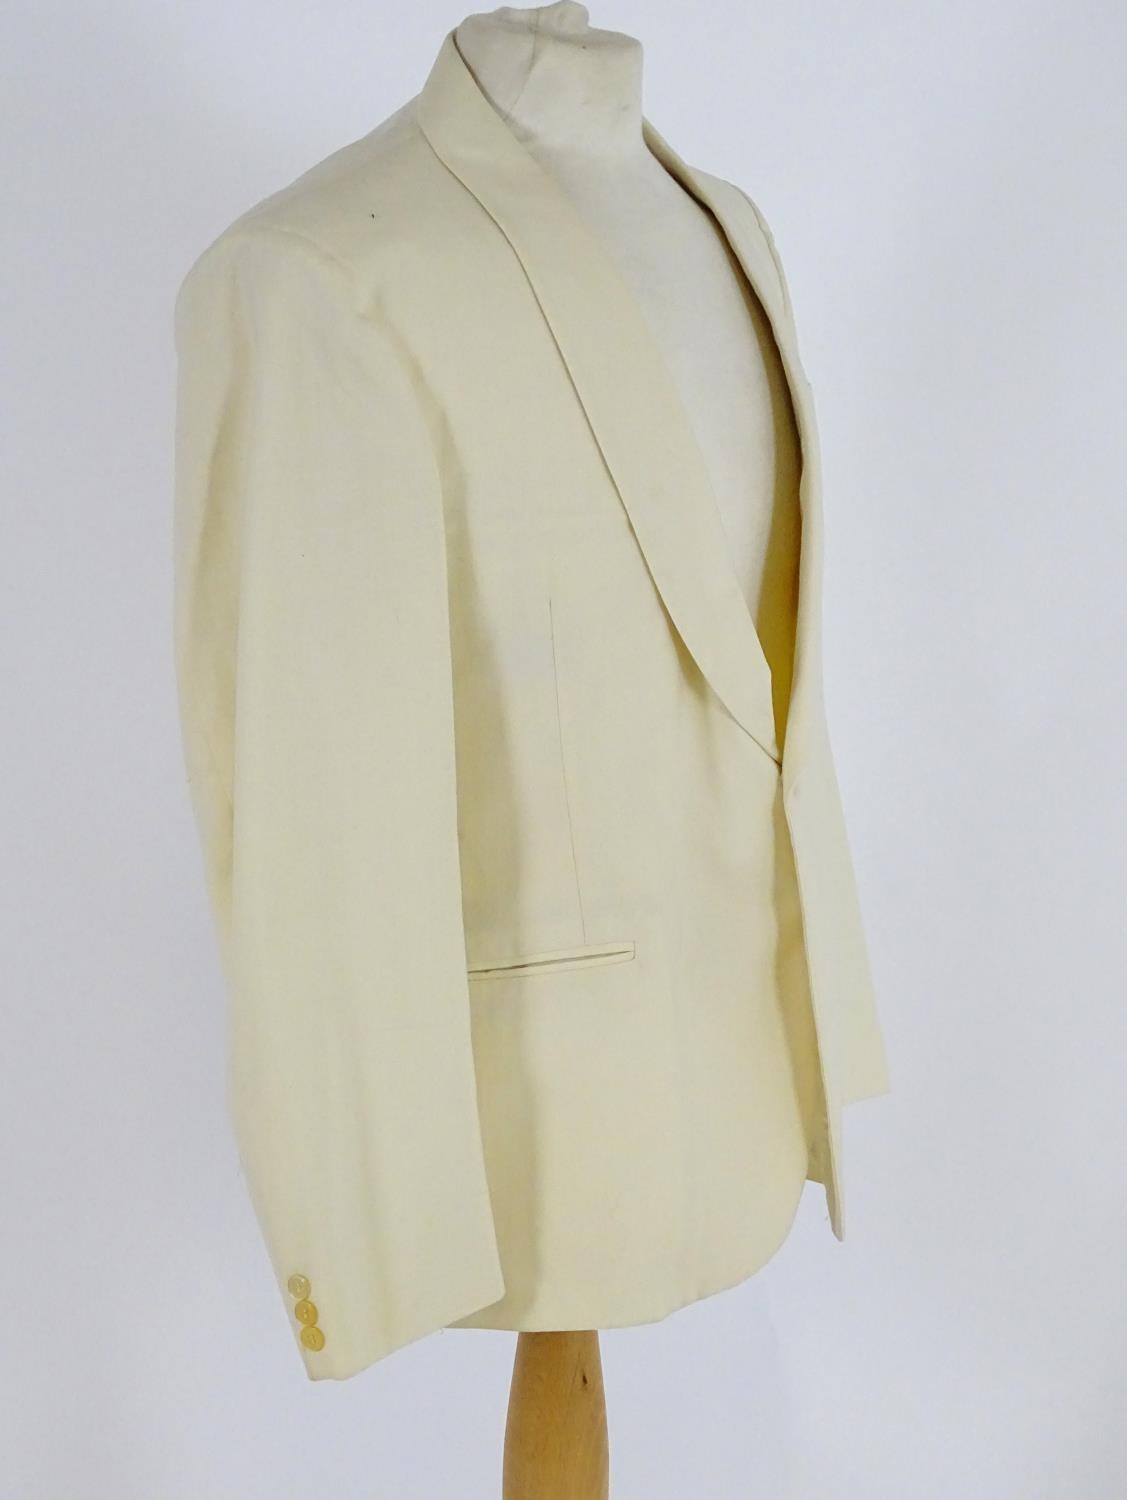 Vintage clothing/ fashion: A vintage men's evening dinner suit with additional cream jacket. Chest - Image 12 of 16